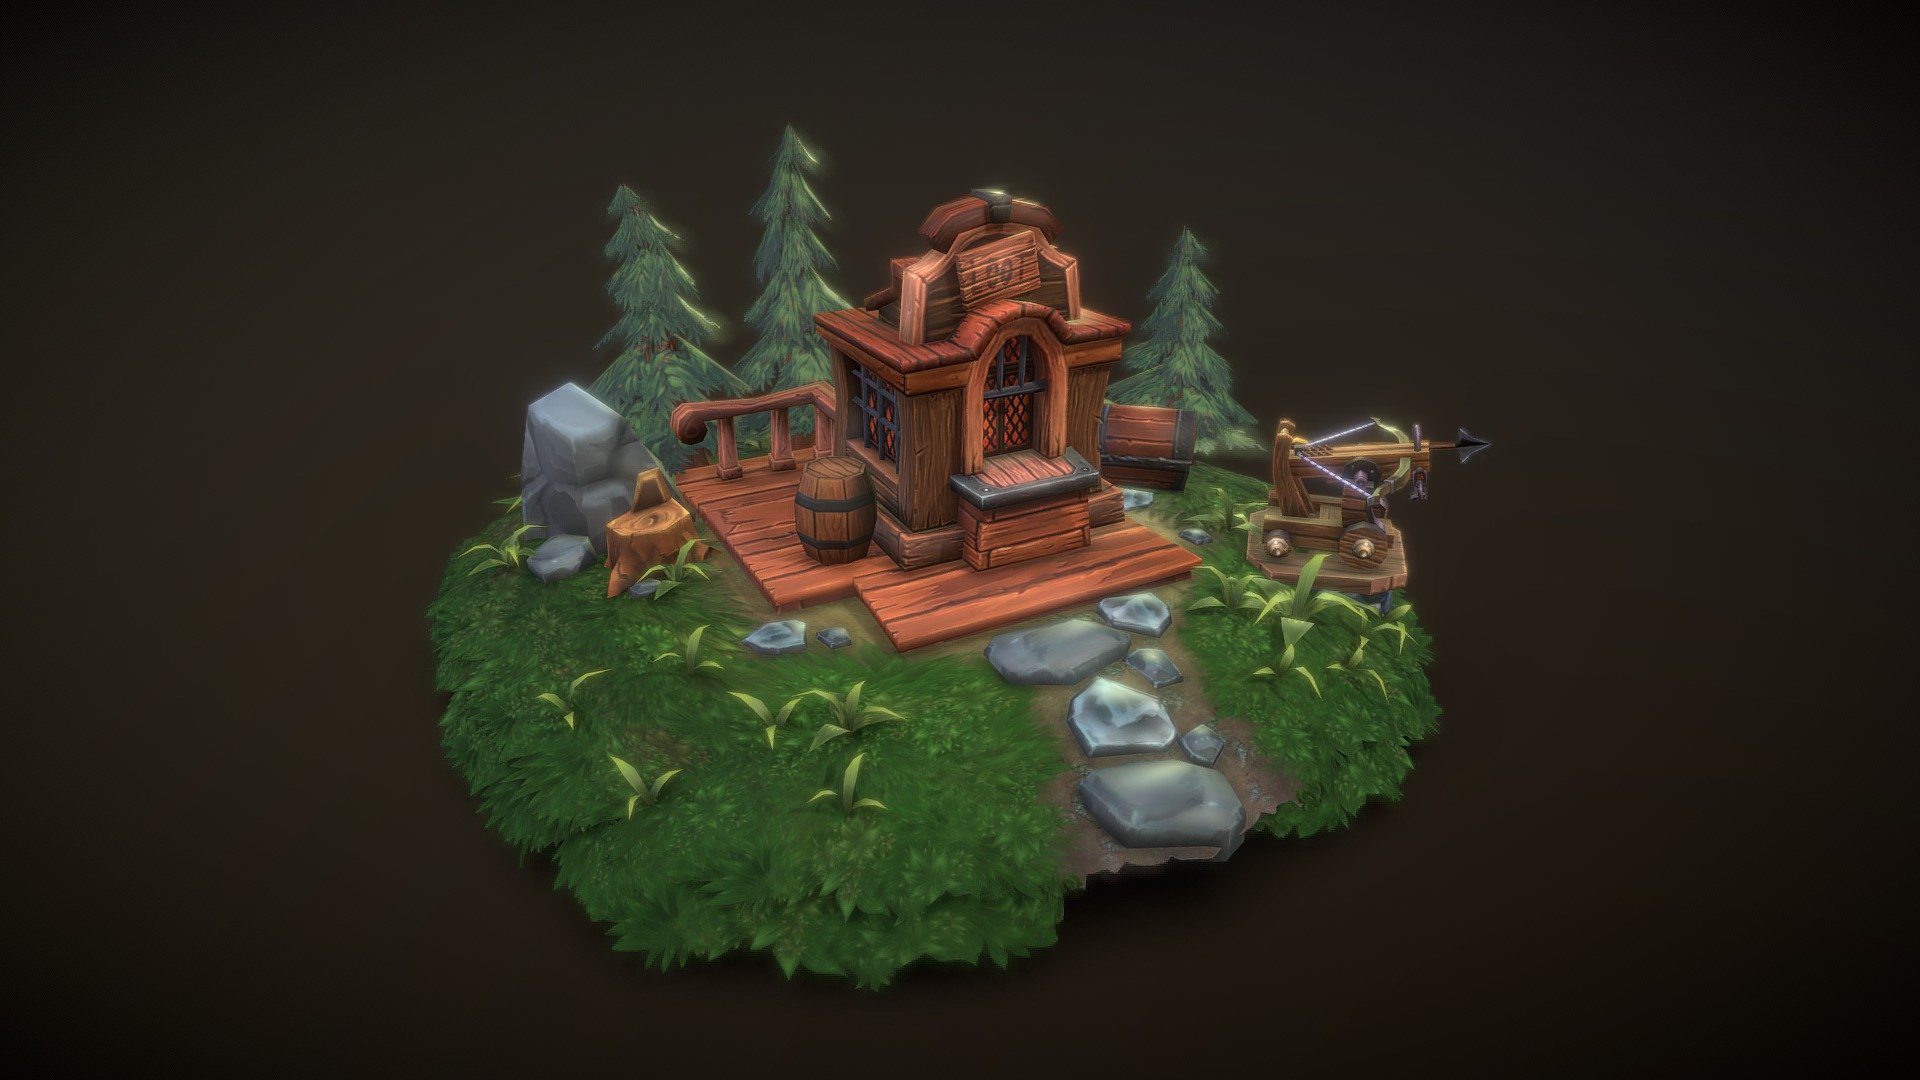 Made for fun and self-educ. All objects  was unwraped &amp;textures as separate UV,after that combined in second UV channel to union atlas.After that rebaked from UV1 to UV2.
textures:
2K diffuse atlas with  alpha
1K specular atlas

https://www.artstation.com/artwork/9PalO - Loot house - 3D model by artrynk 3d model